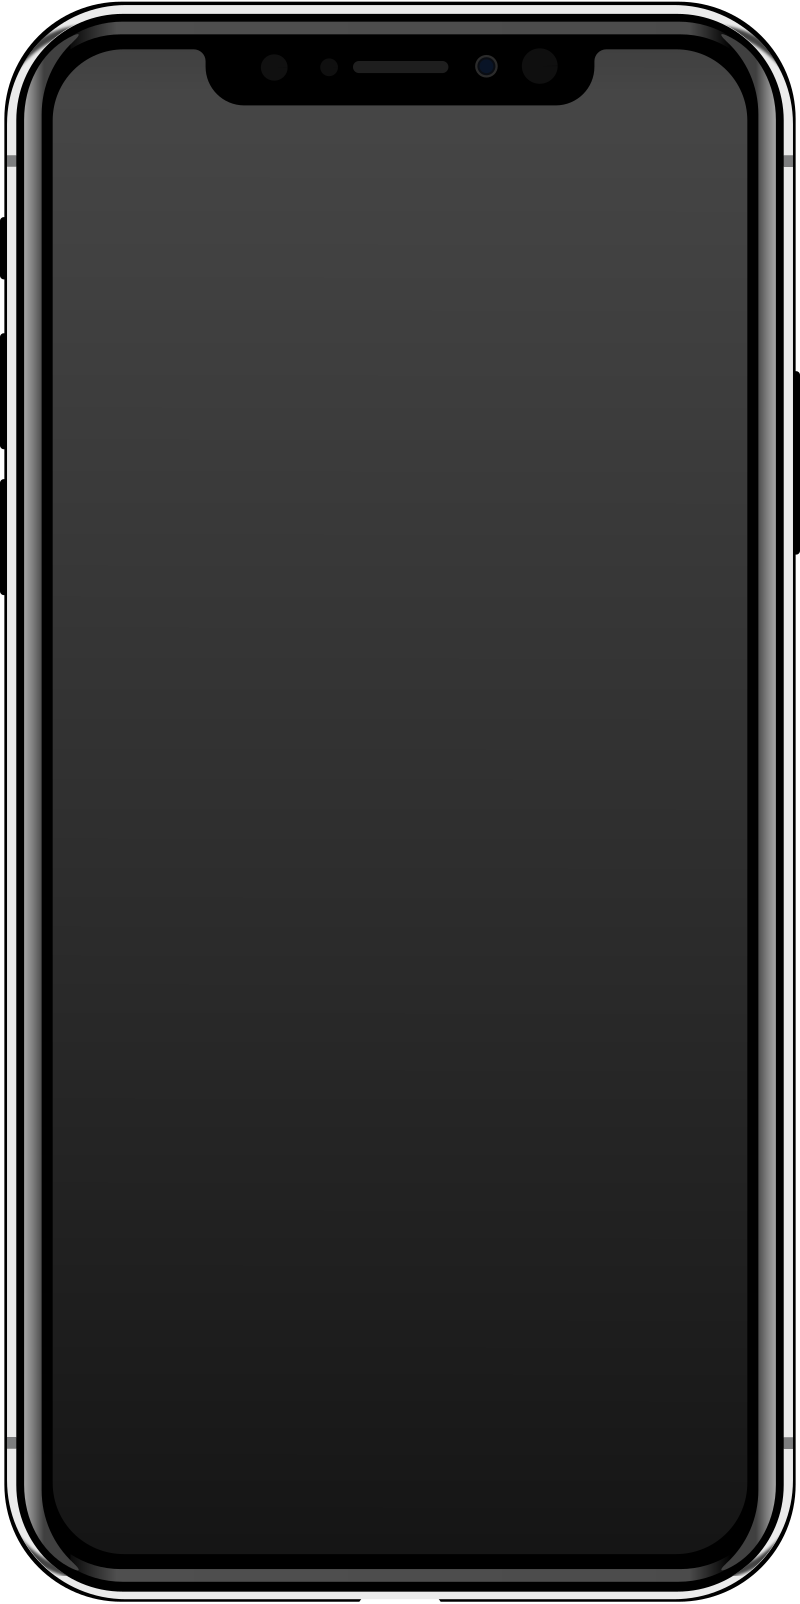 iPhone X with black screen